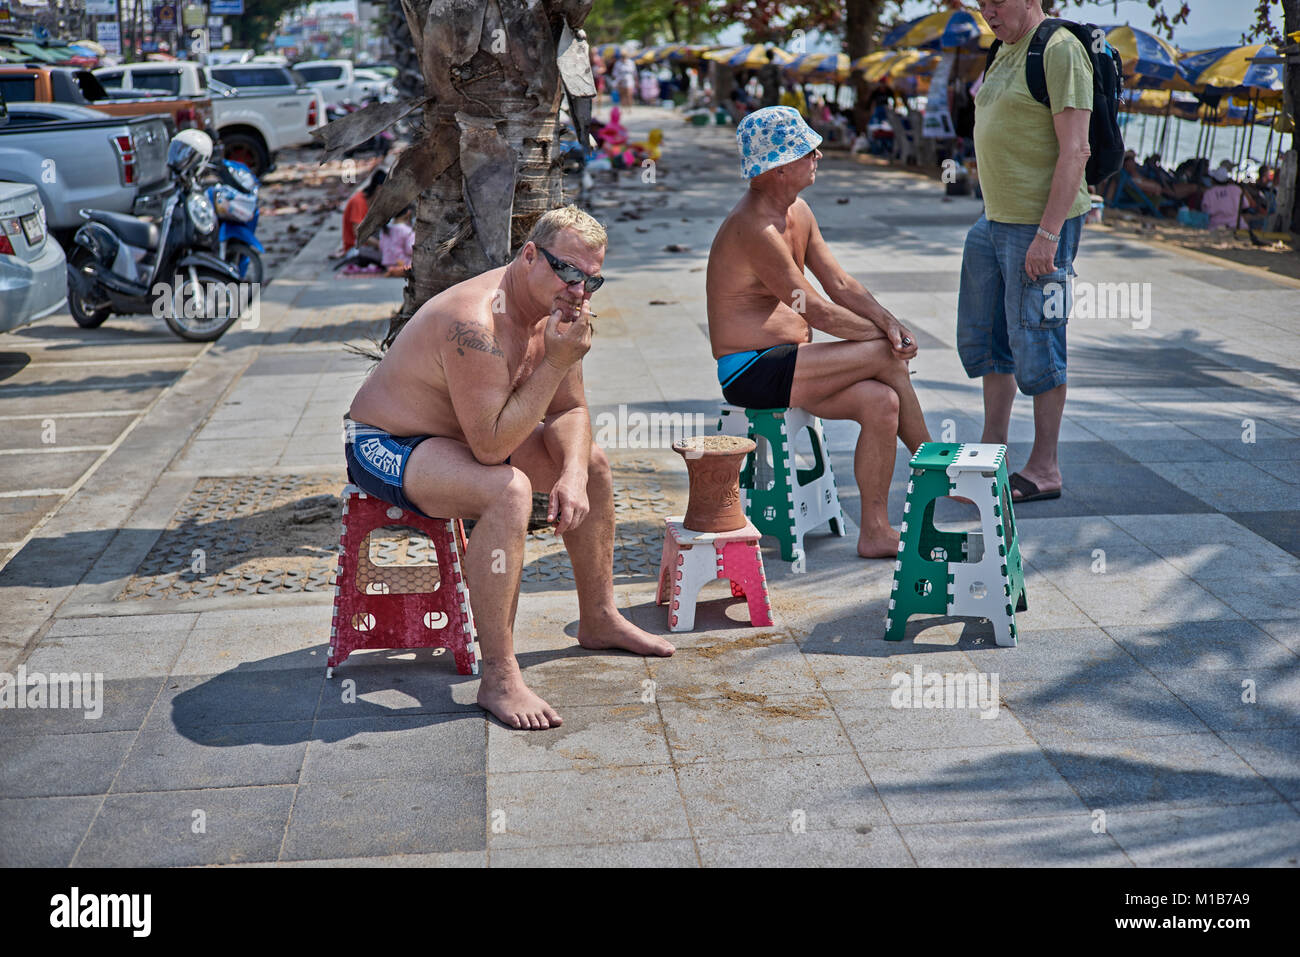 Smokers confined to the Thailand sidewalk following the introduction of a beach smoking ban. Pattaya Southeast Asia Stock Photo